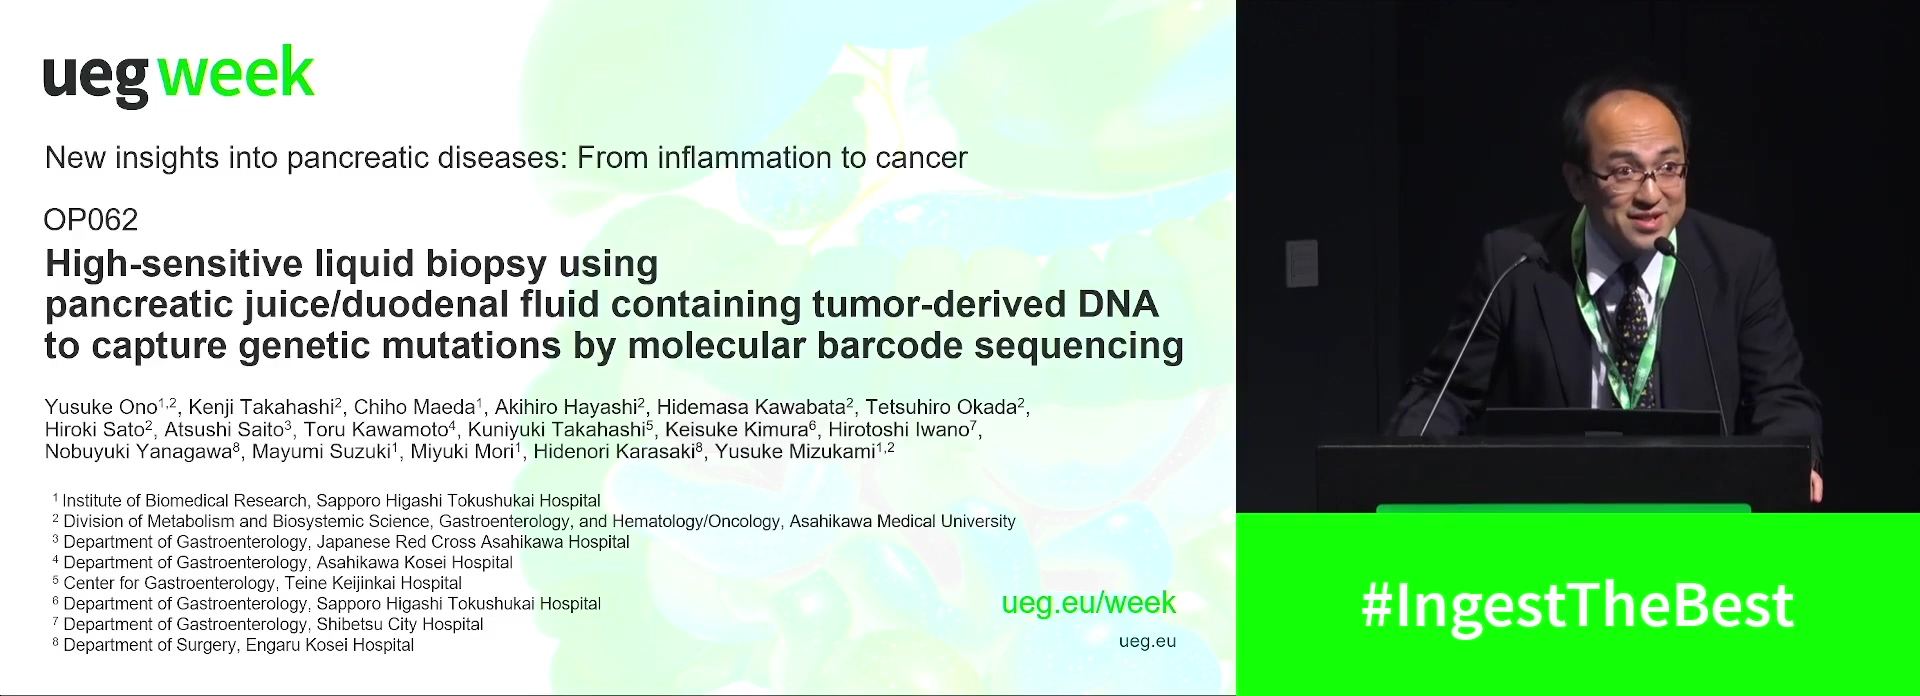 HIGH-SENSITIVE LIQUID BIOPSY USING PANCREATIC JUICE/DUODENAL FLUID CONTAINING TUMOR-DERIVED DNA TO CAPTURE GENETIC MUTATIONS BY MOLECULAR BARCODE SEQUENCING